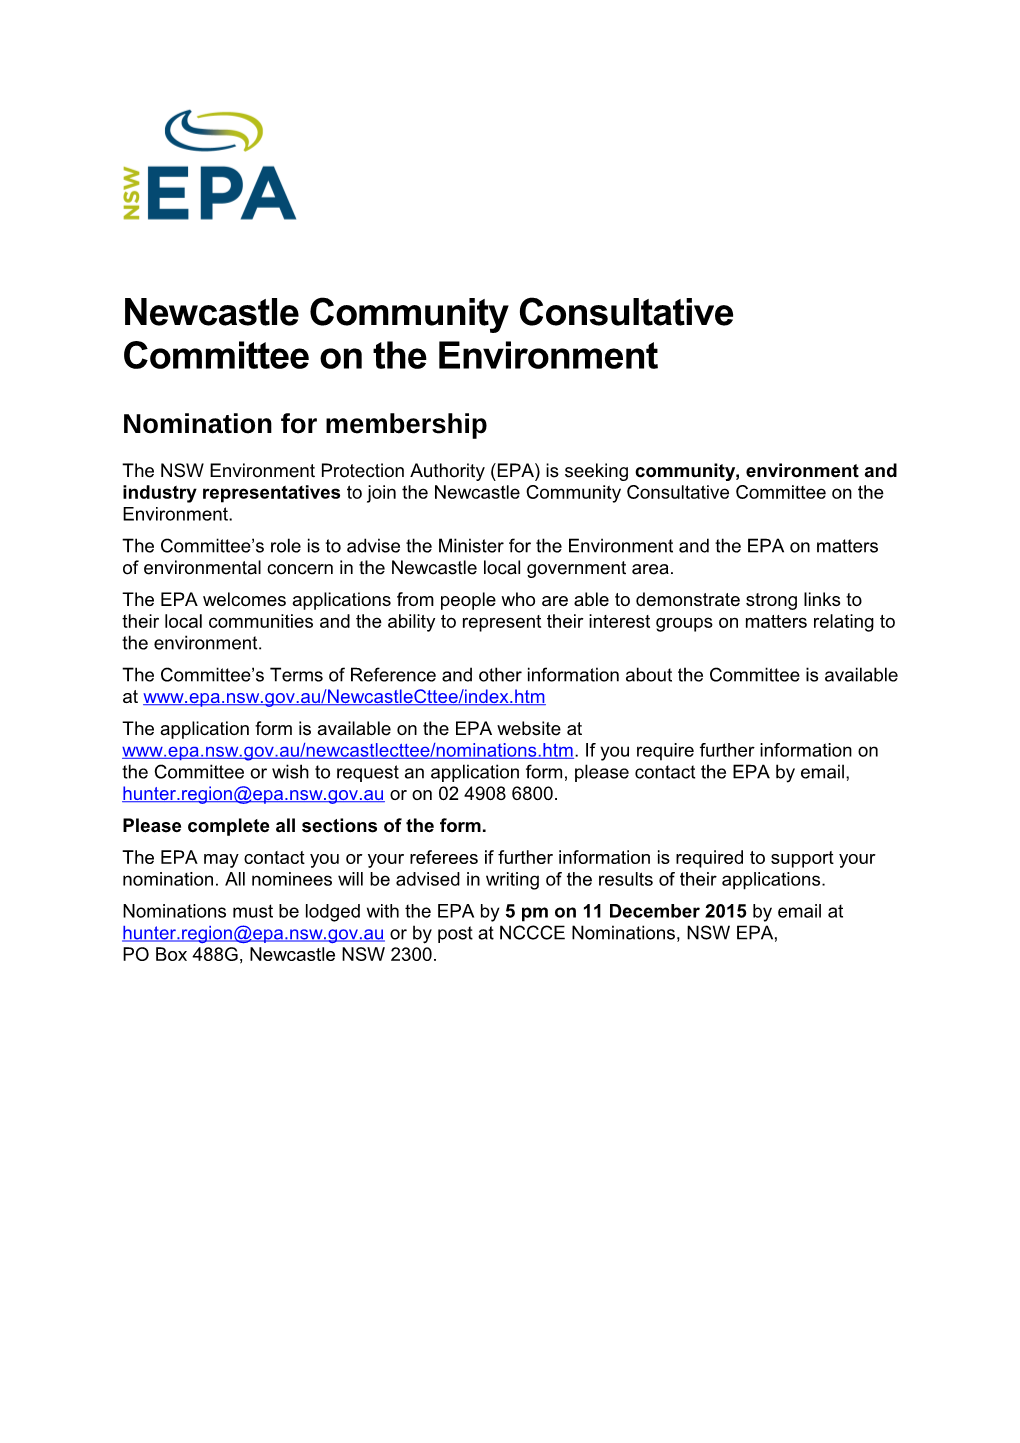 Newcastle Community Consultative Committee on the Environment: Nomination for Membership Form